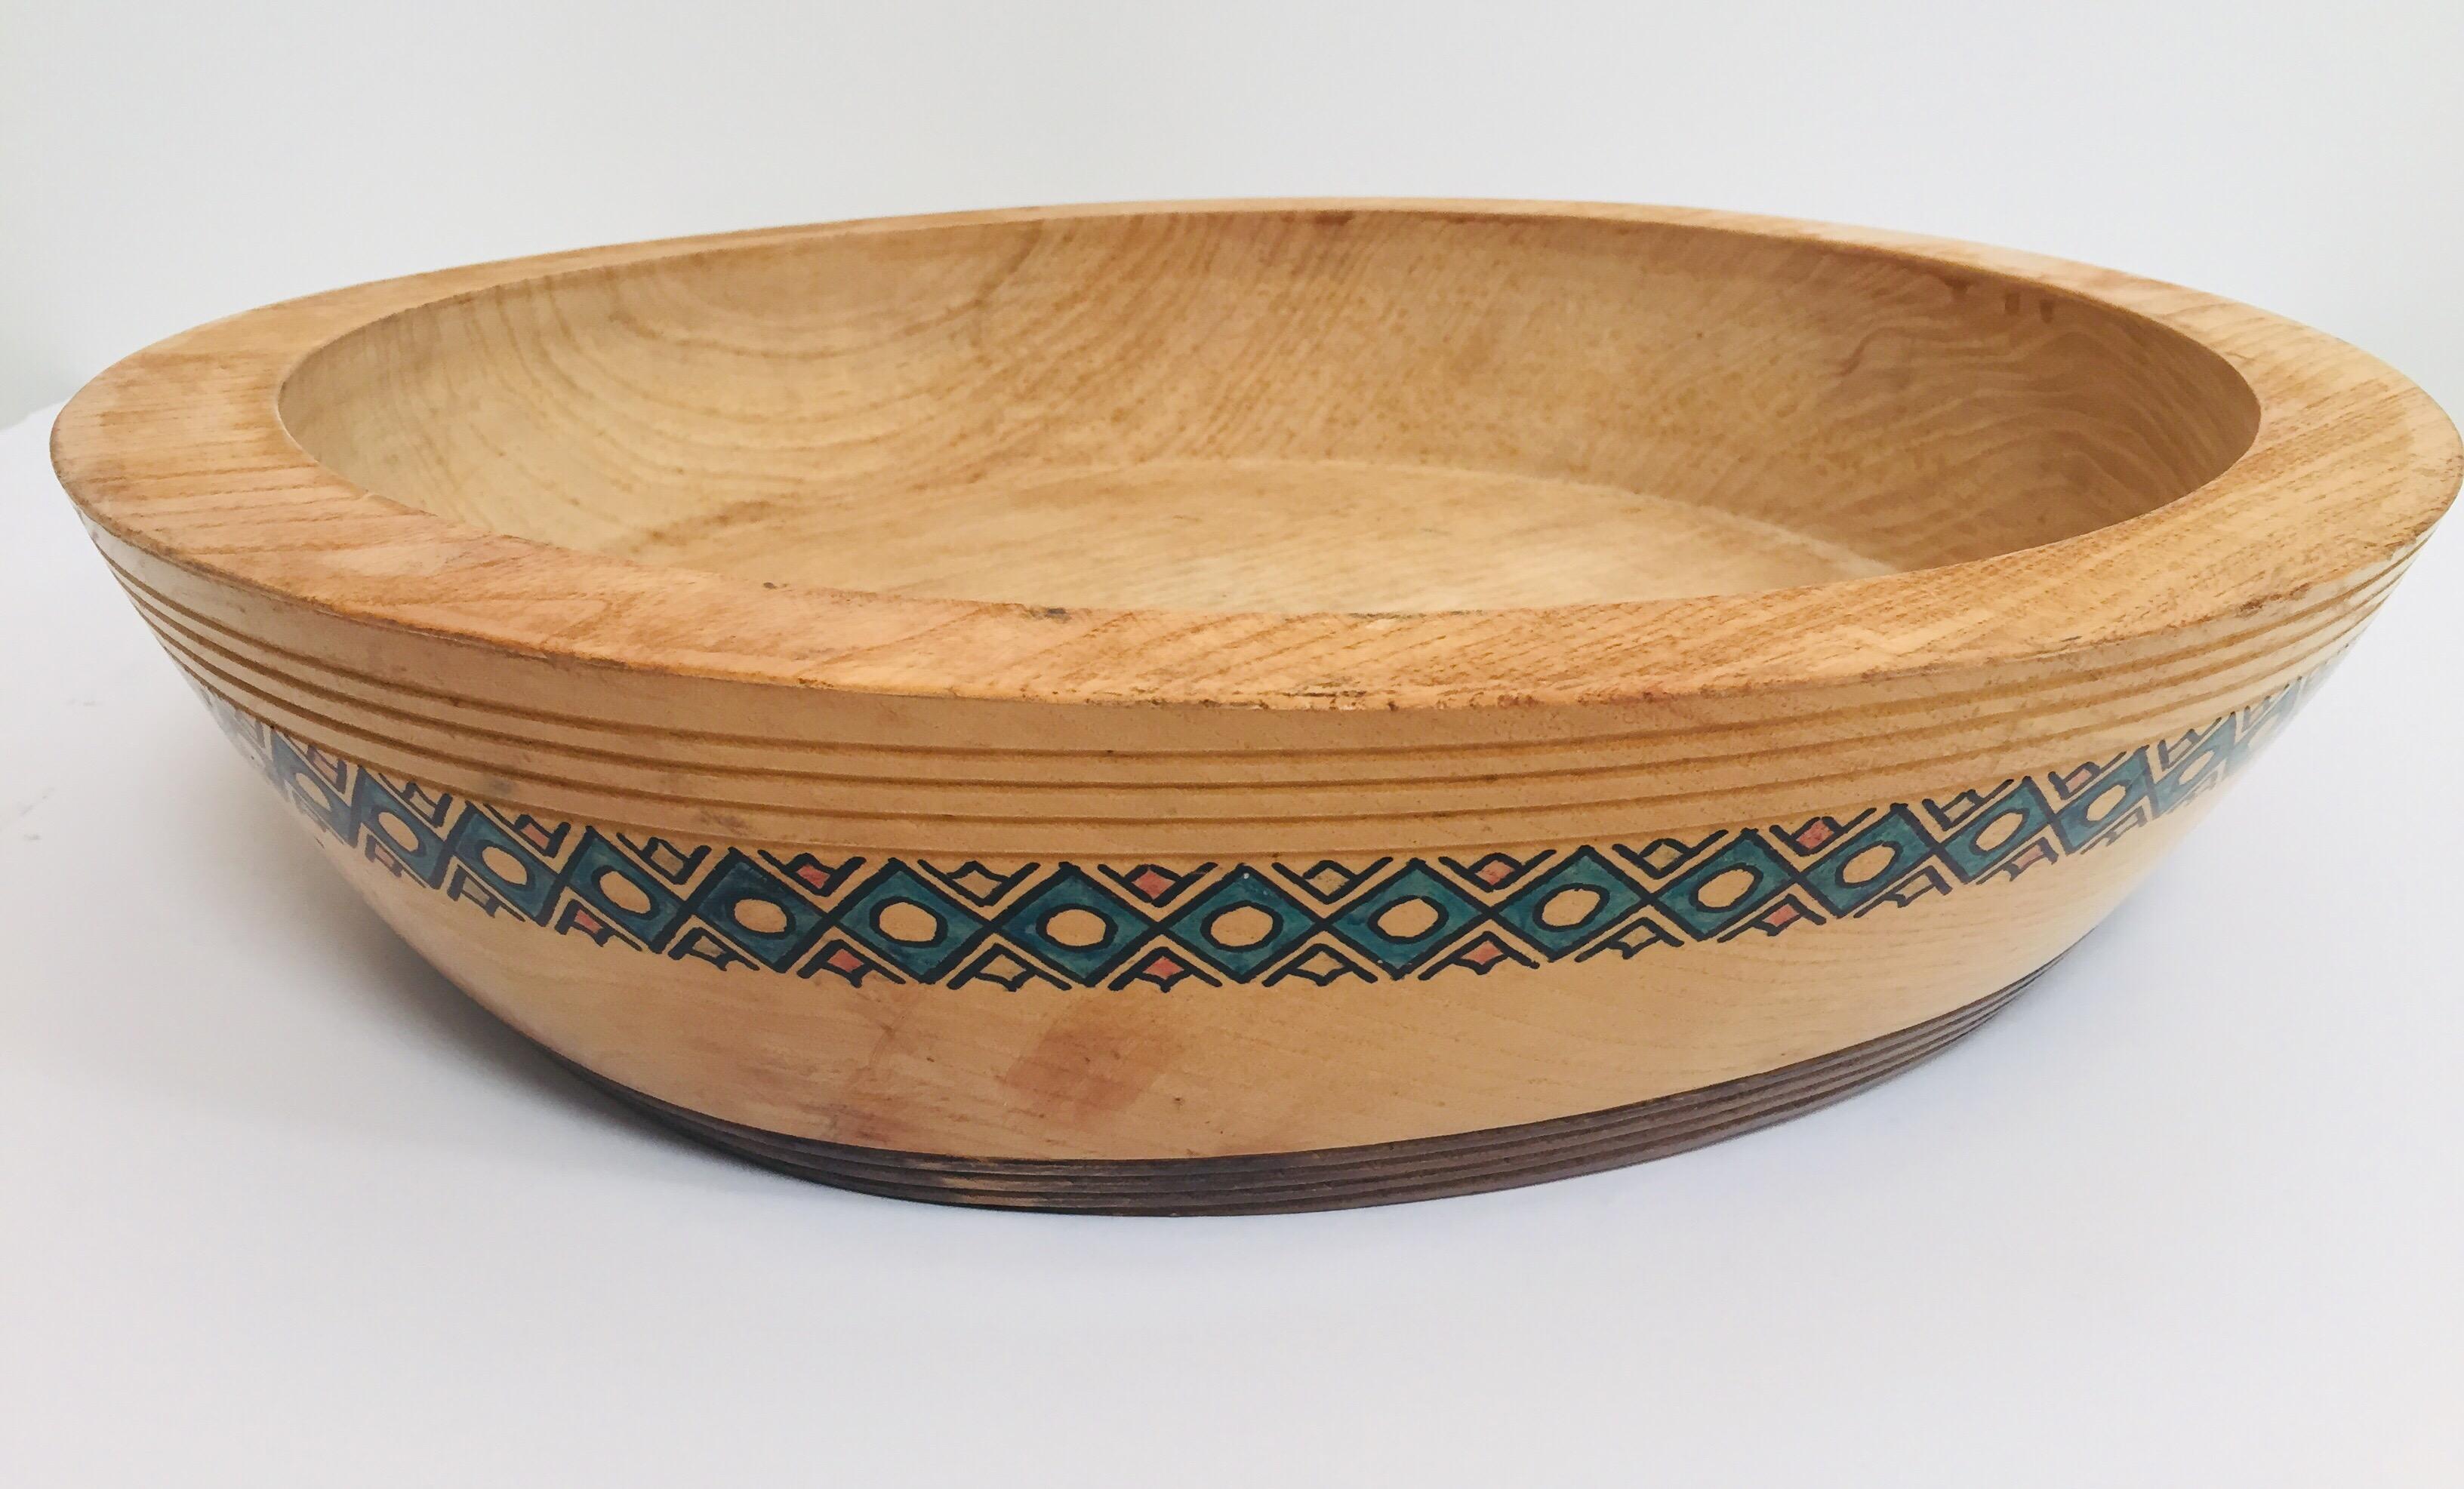 Massive vintage primitive bowl hand hewn large round wood dough bowl.
This hand carved wood bowl was originally used for kneading and rising bread dough or making couscous.
Solid and great looking hand hewn rustic round wooden dough bowl.
Food